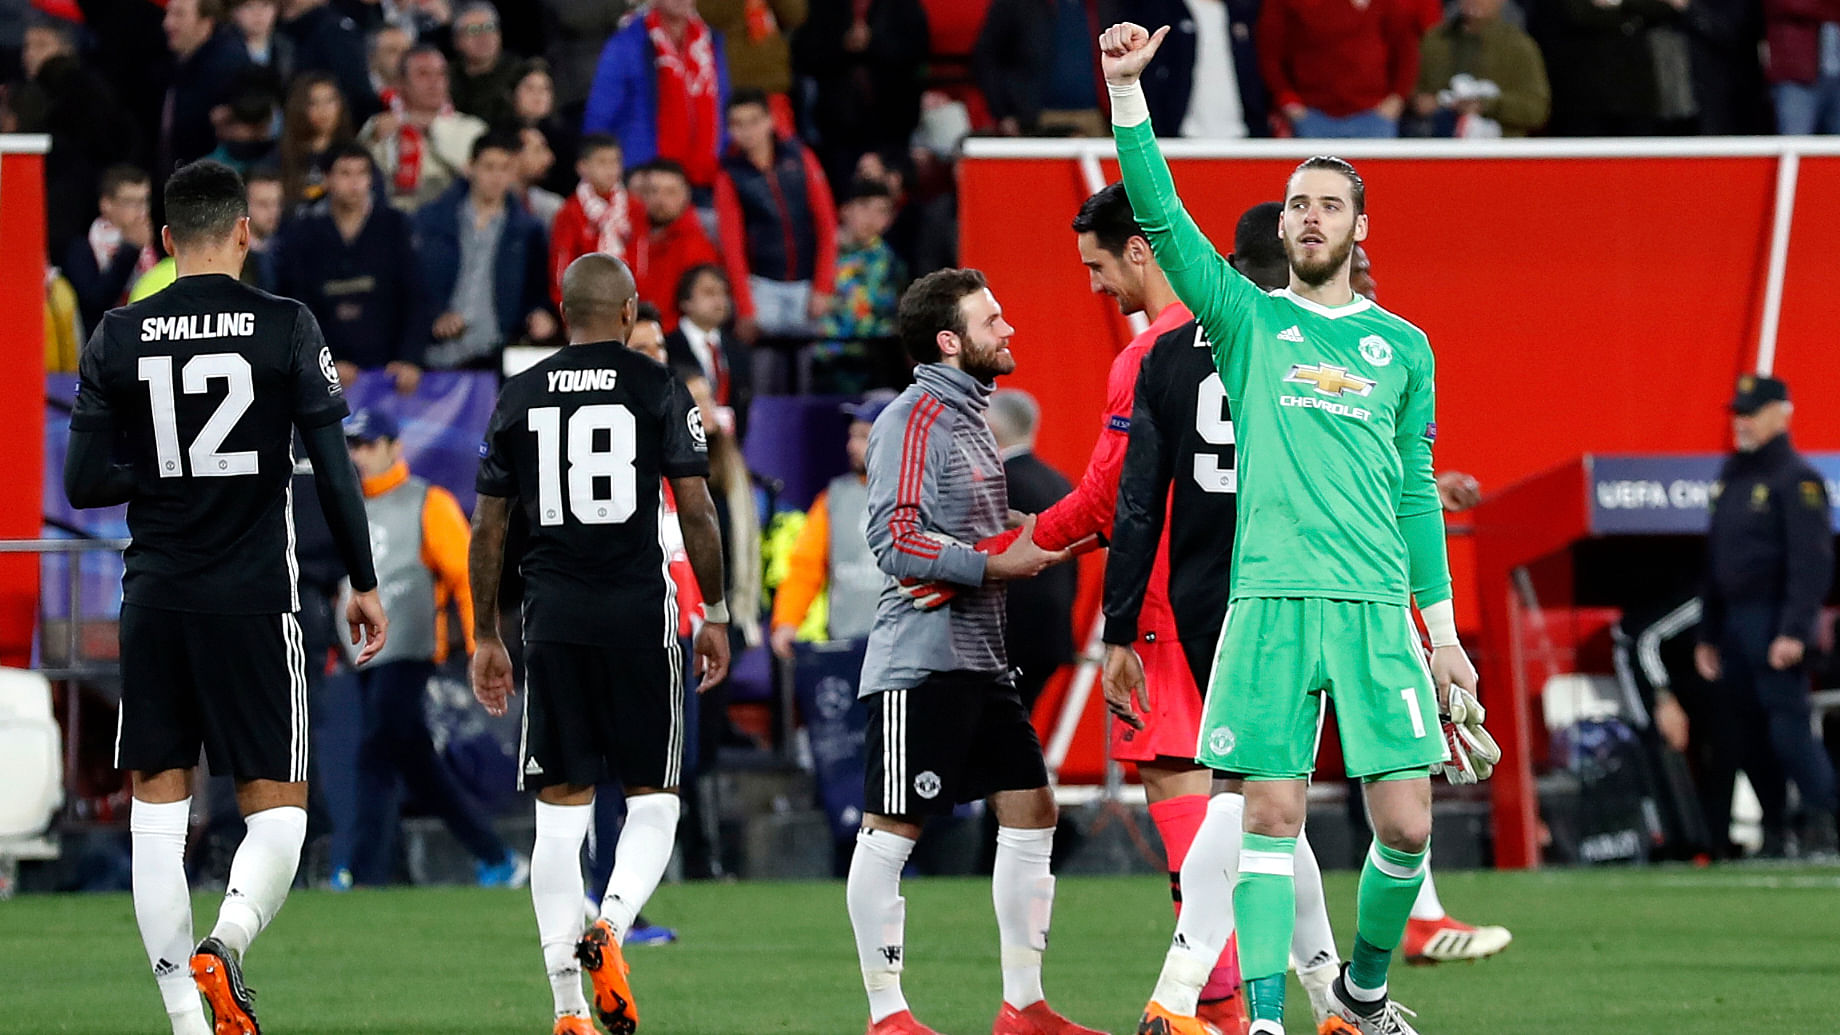 Manchester United goalkeeper David de Gea (right) gestures to the supporters at the end of the Champions League round of sixteen  match against Sevilla FC.